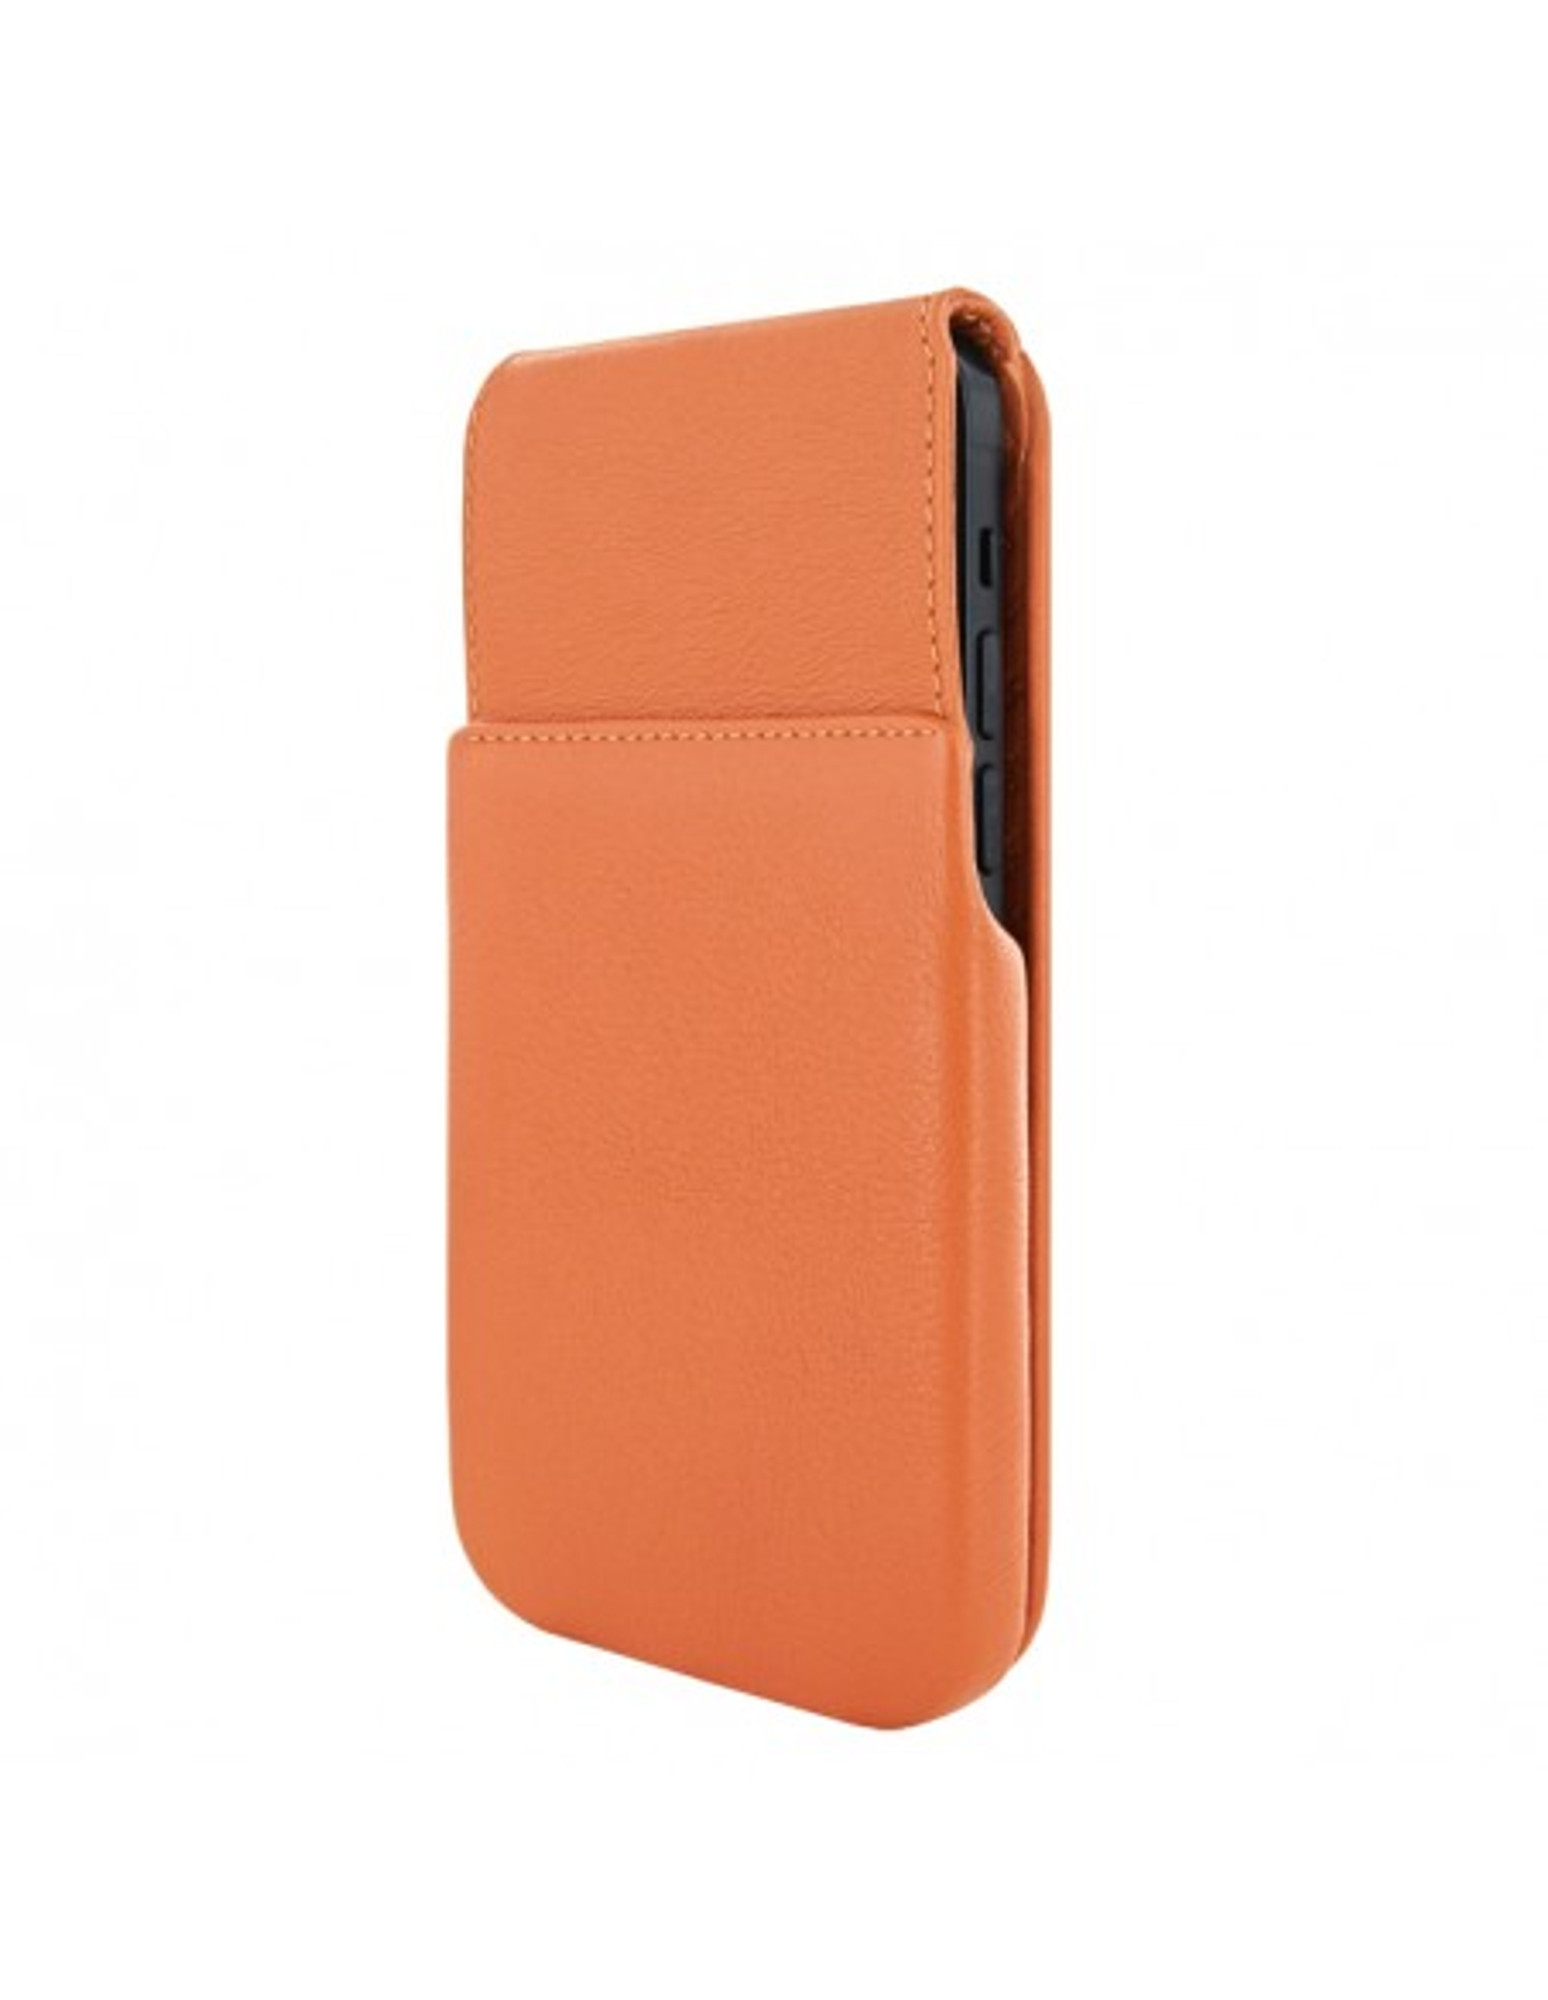 iPhone 13 Pro Max Cases, iPhone Cover Case